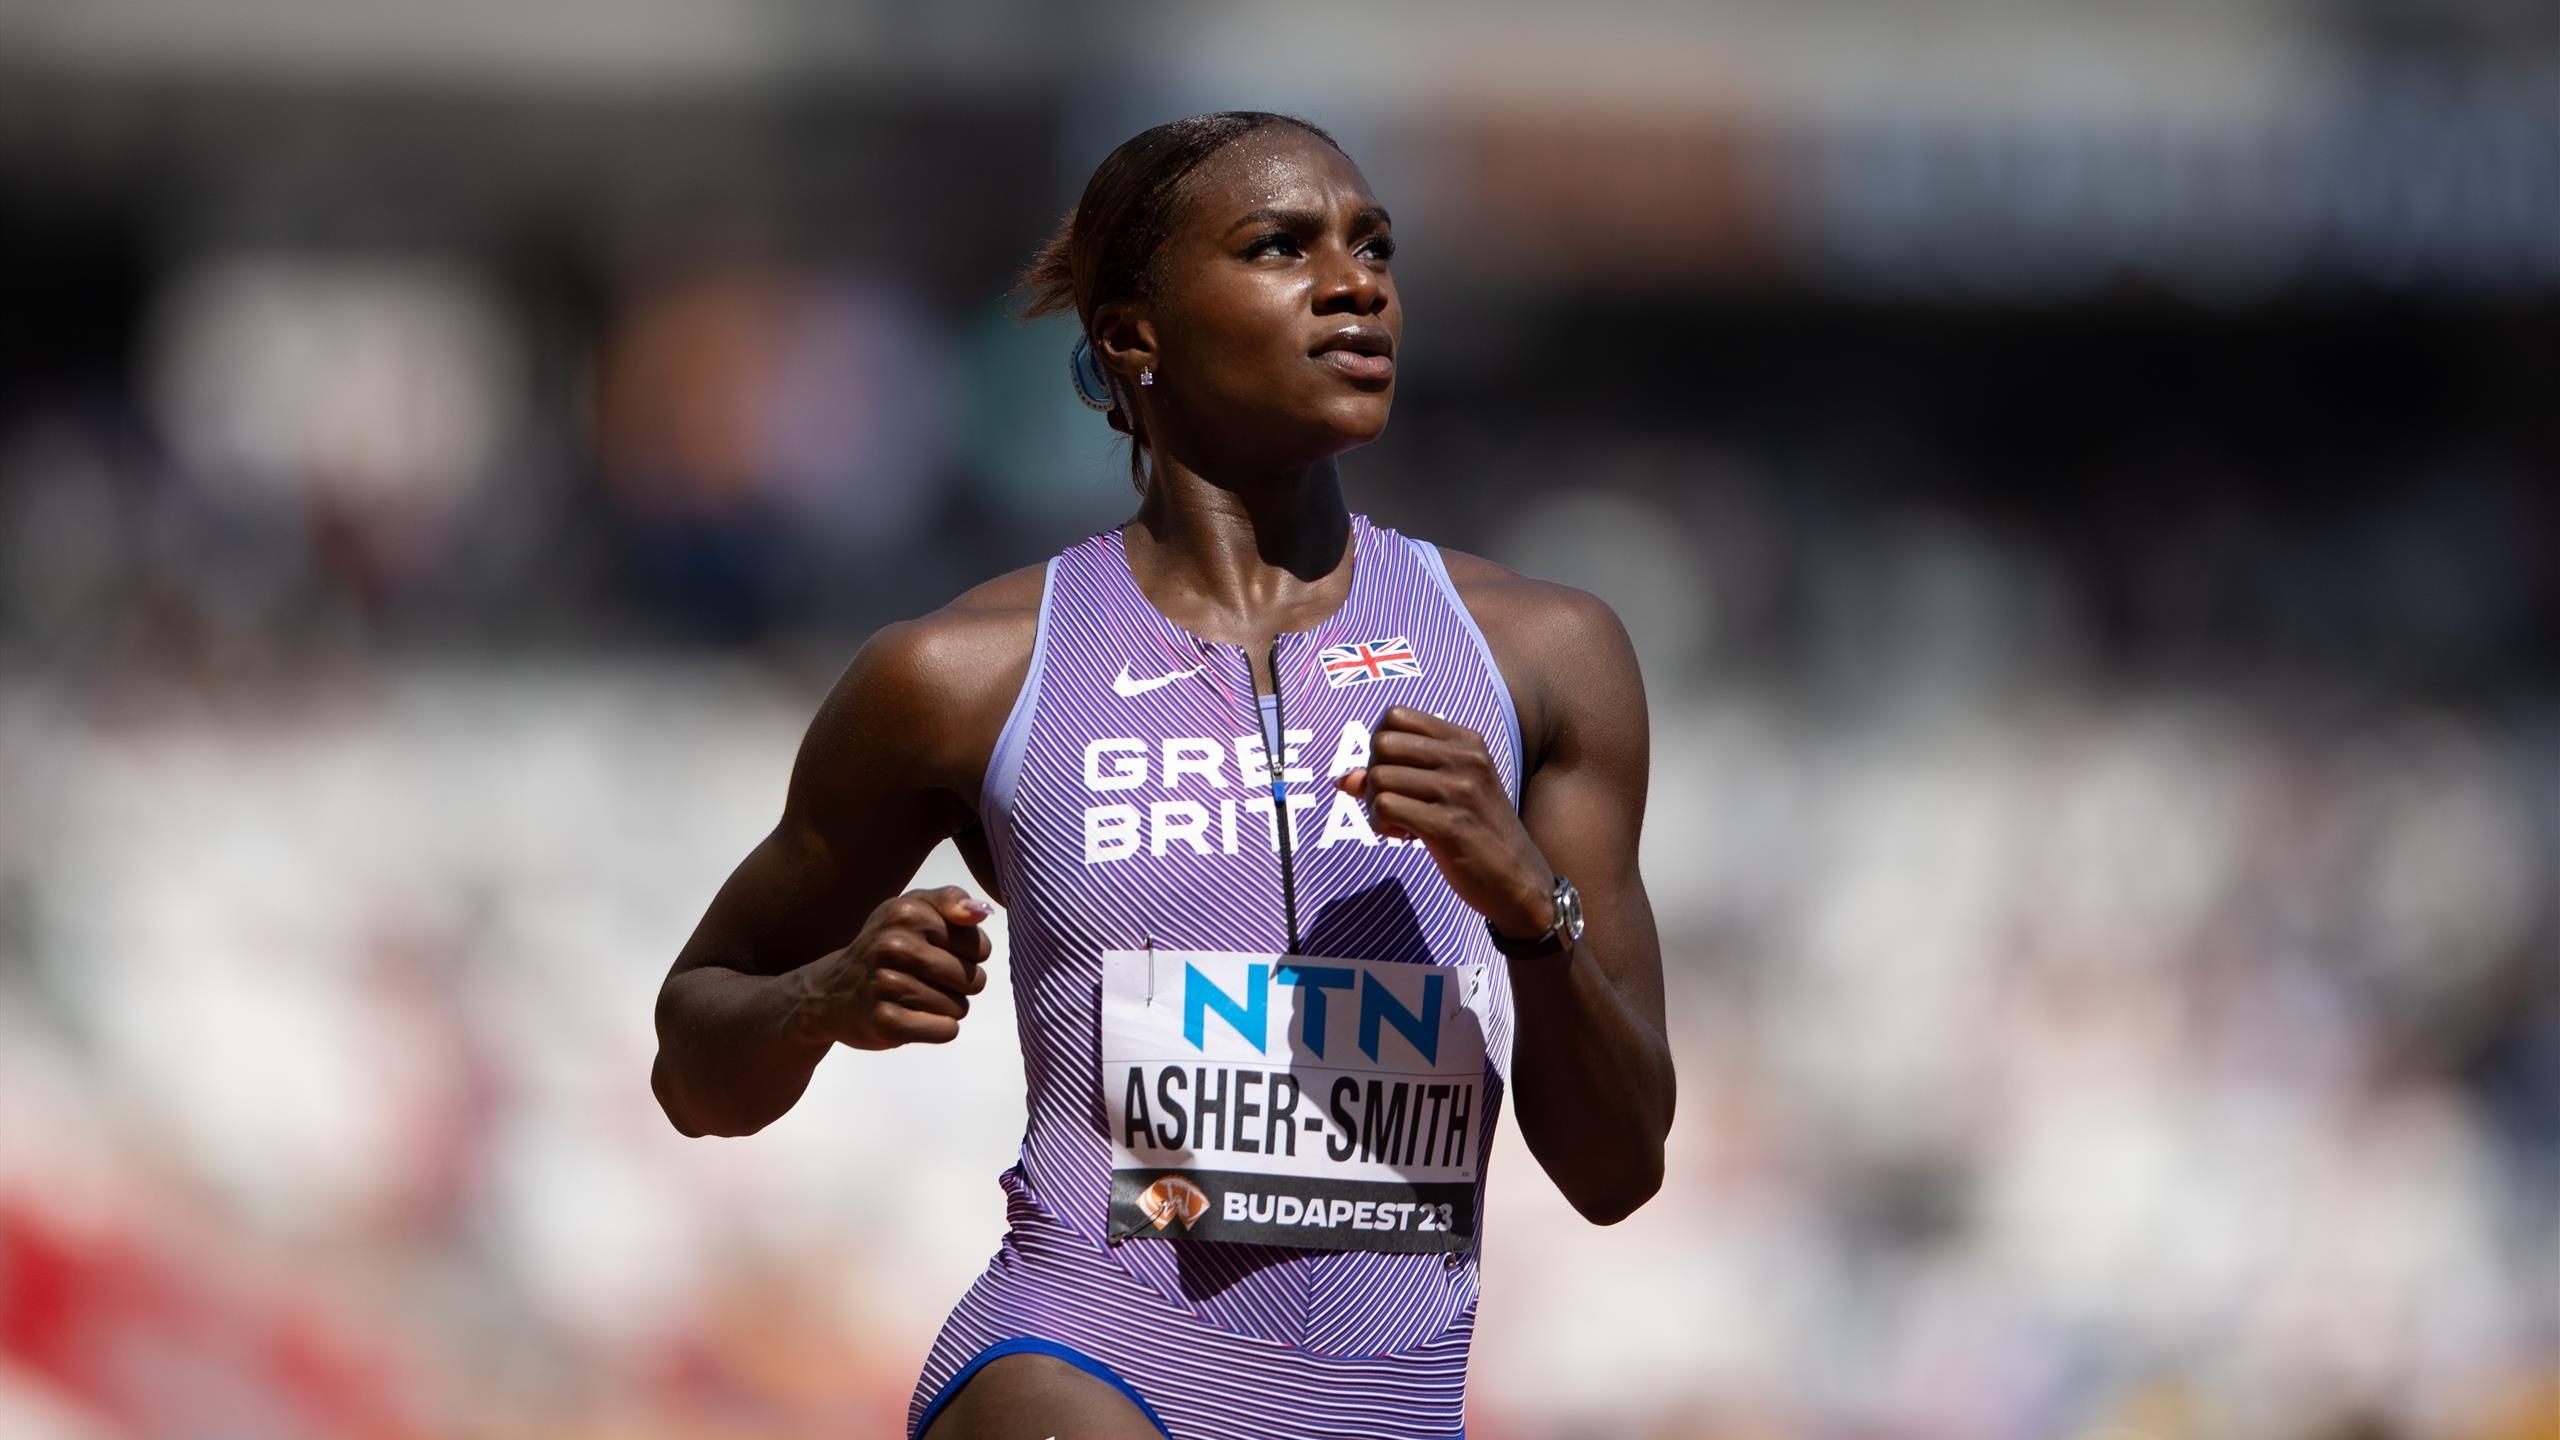 World Athletics Championships 2023 How to watch and live stream, schedule, dates, live stream and TV channel